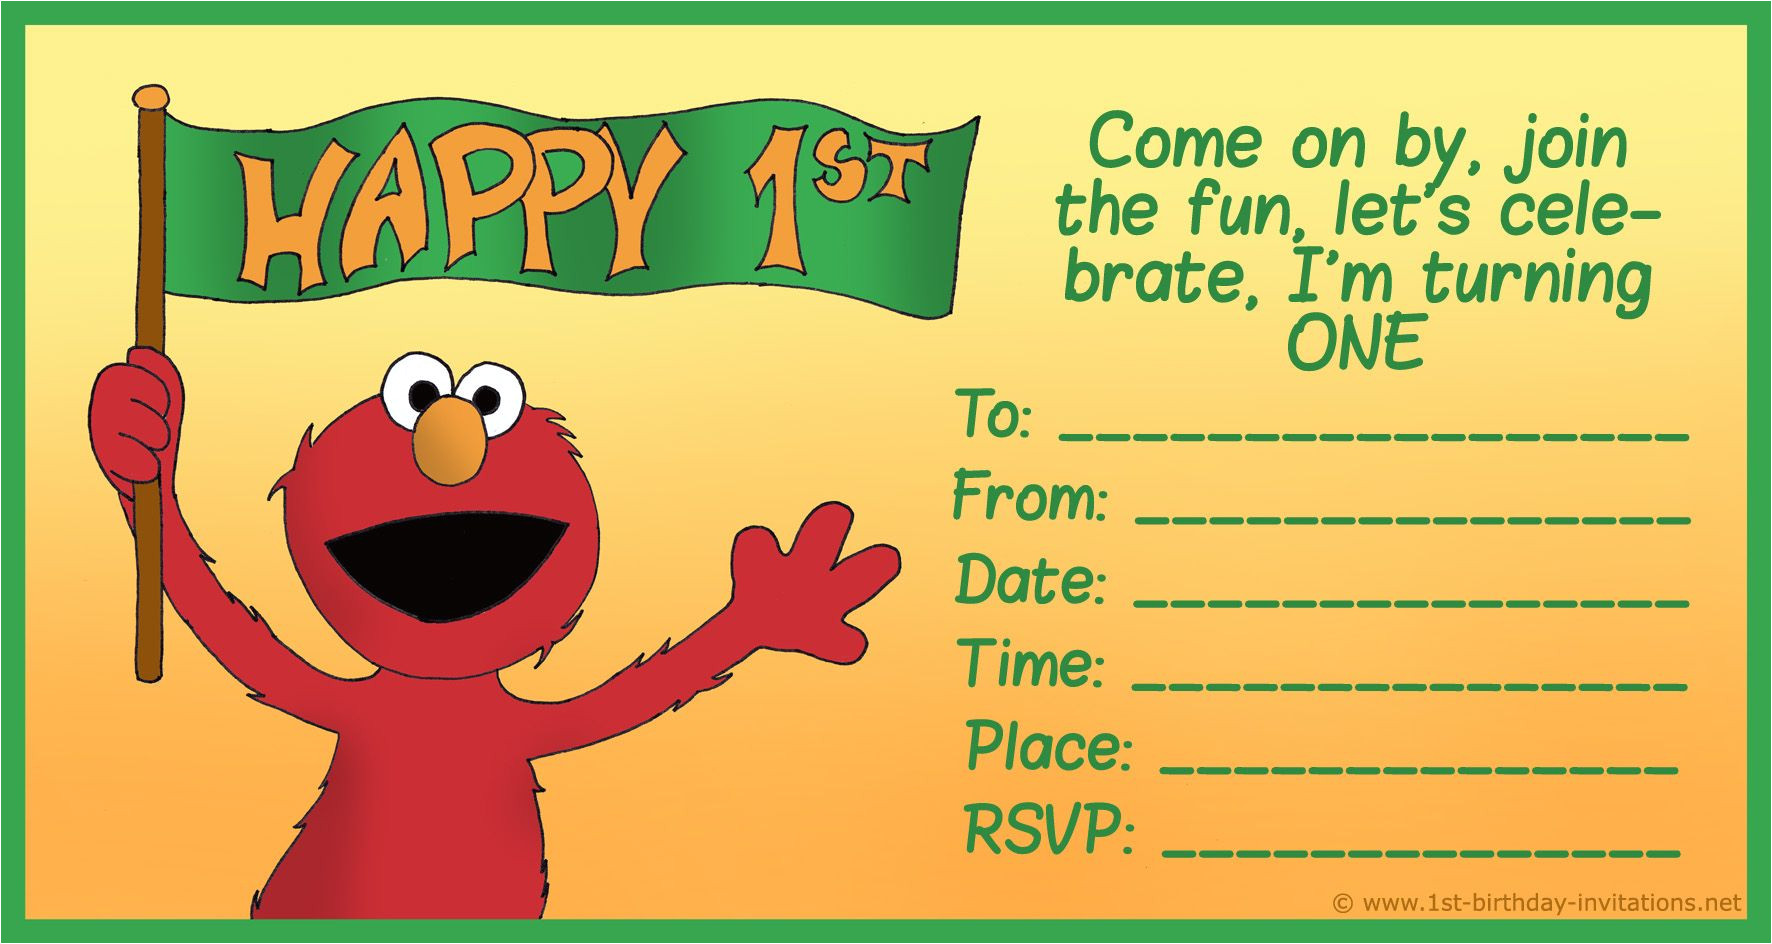 Street Party Invitation Template Pin by Bagvania Invitation On Bagvania Invitation Free